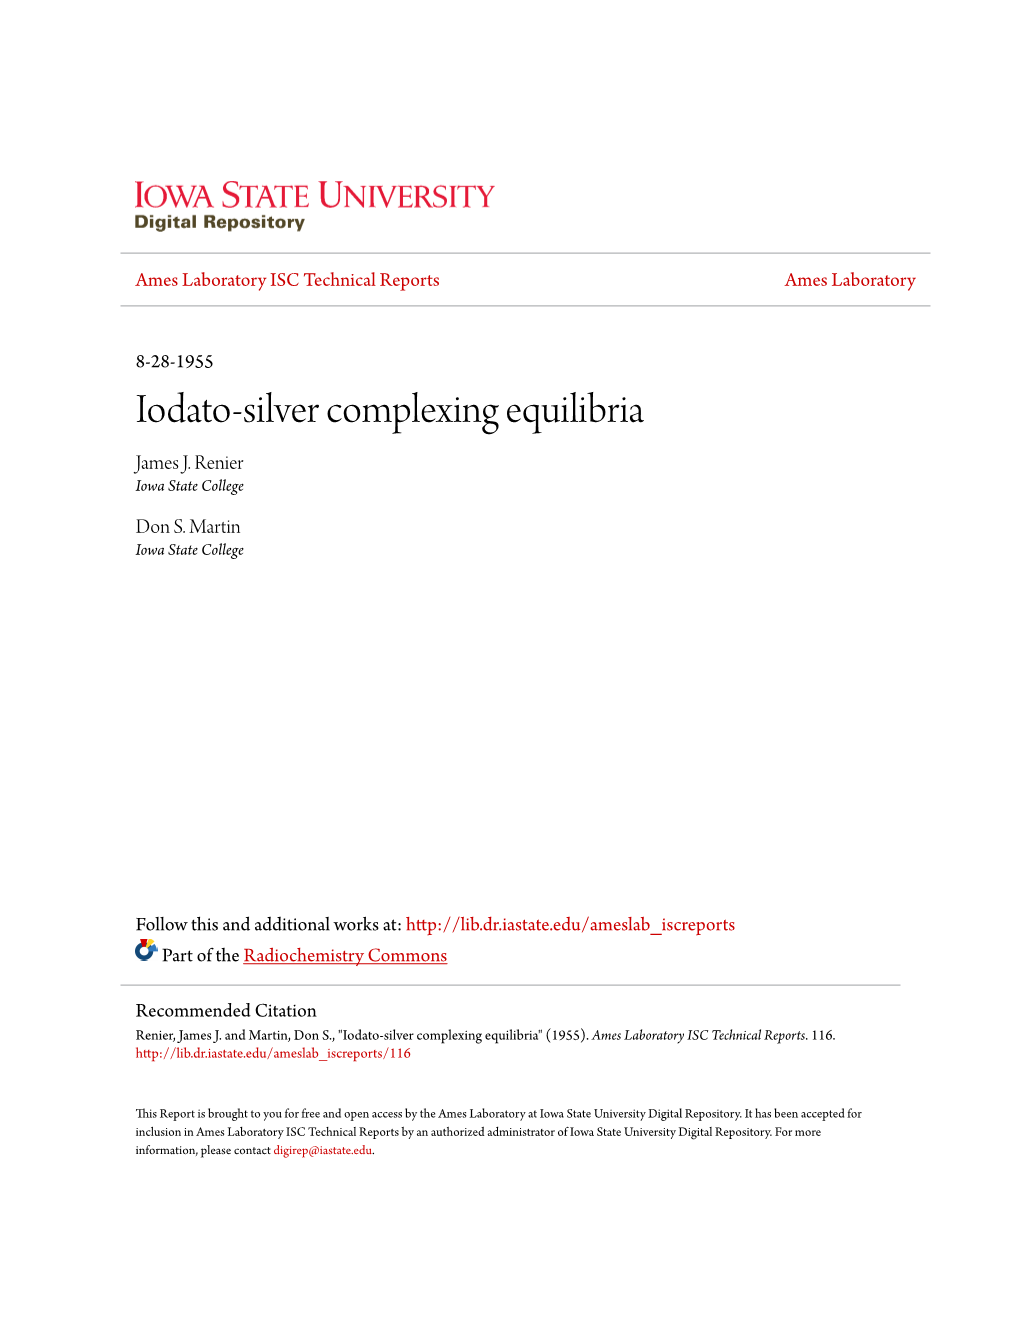 Iodato-Silver Complexing Equilibria James J